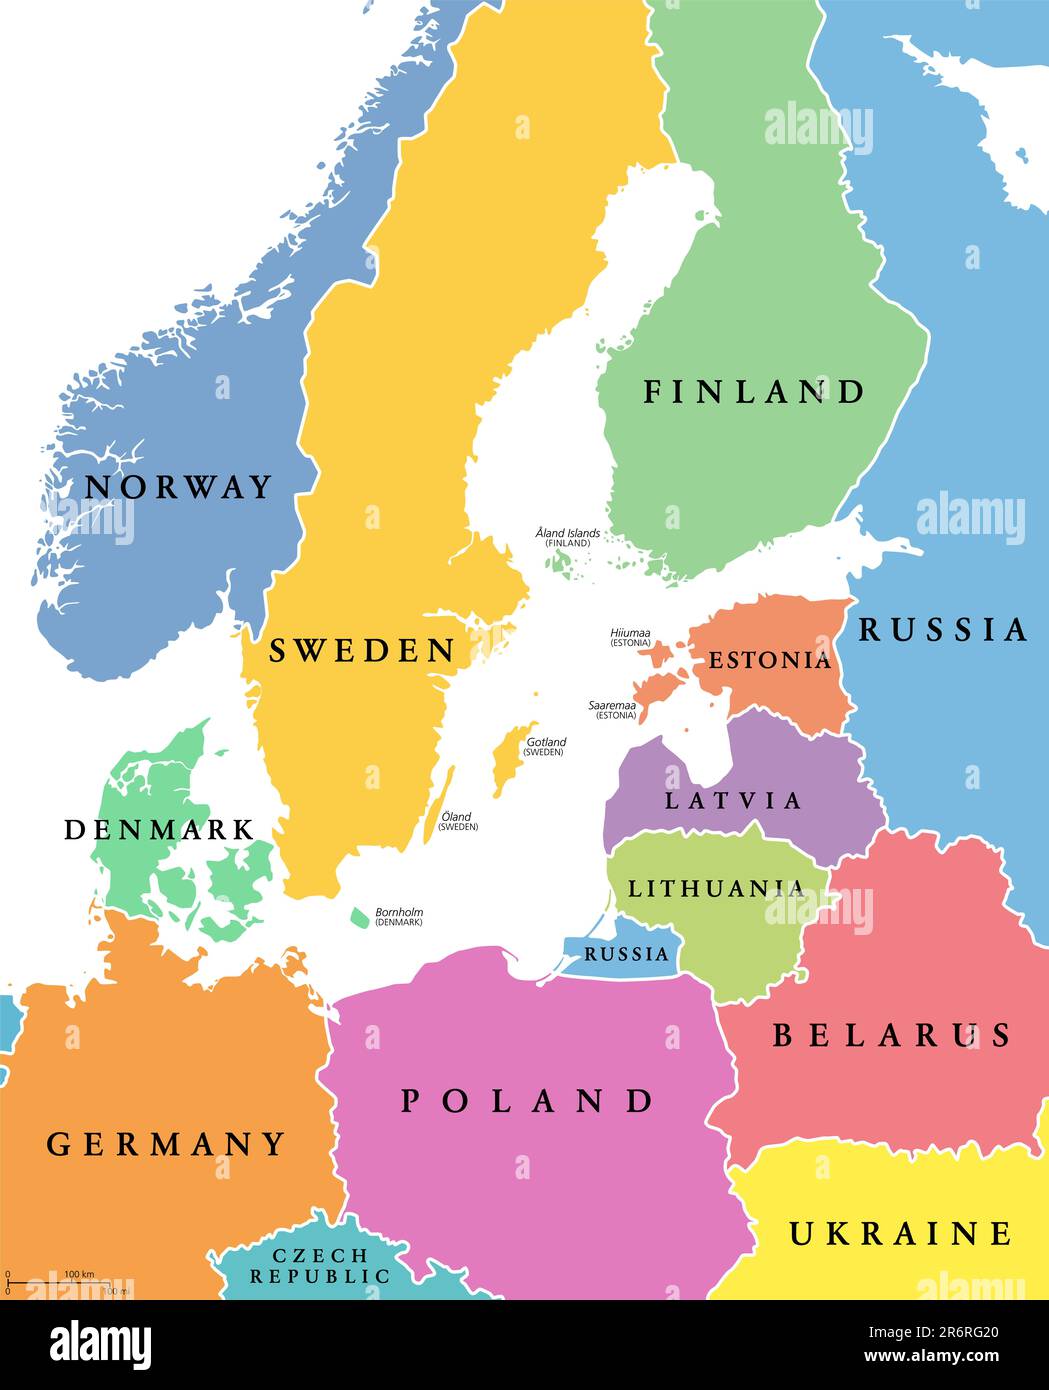 Baltic Sea area, colored countries, political map, with national borders and English names. Countries along the coast of the Baltic Sea. Stock Photo